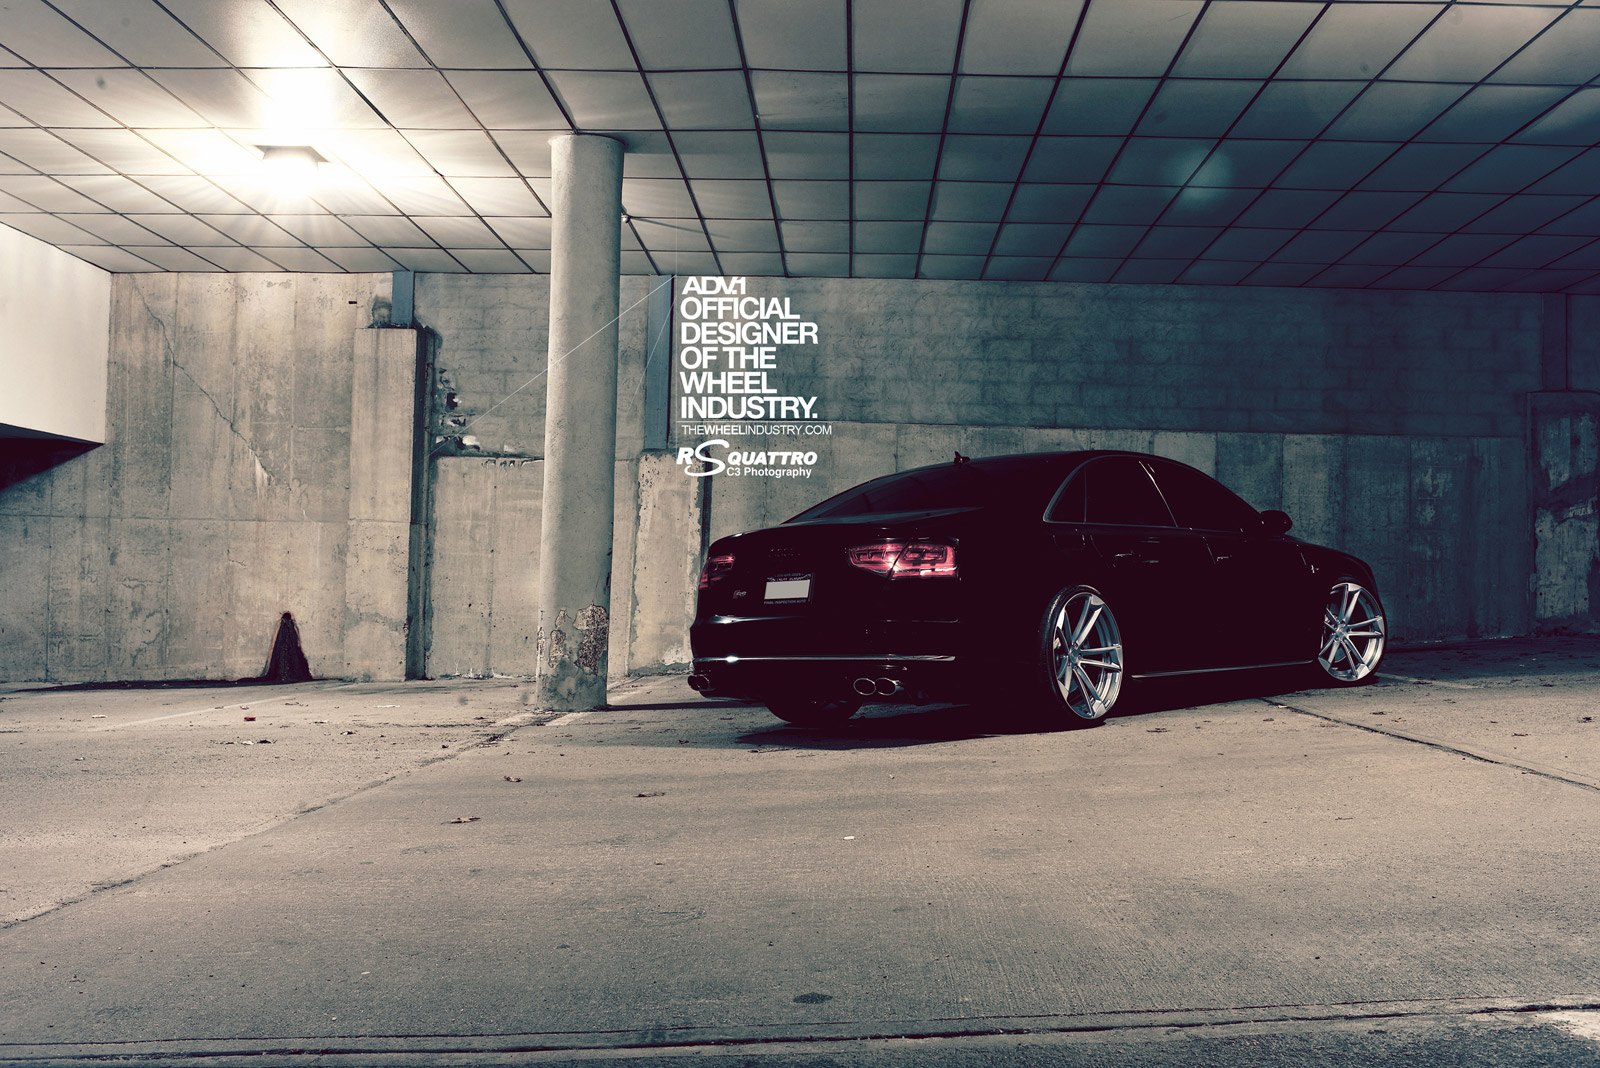 Black Audi A8 with Red LED Taillights - Photo by ADV.1